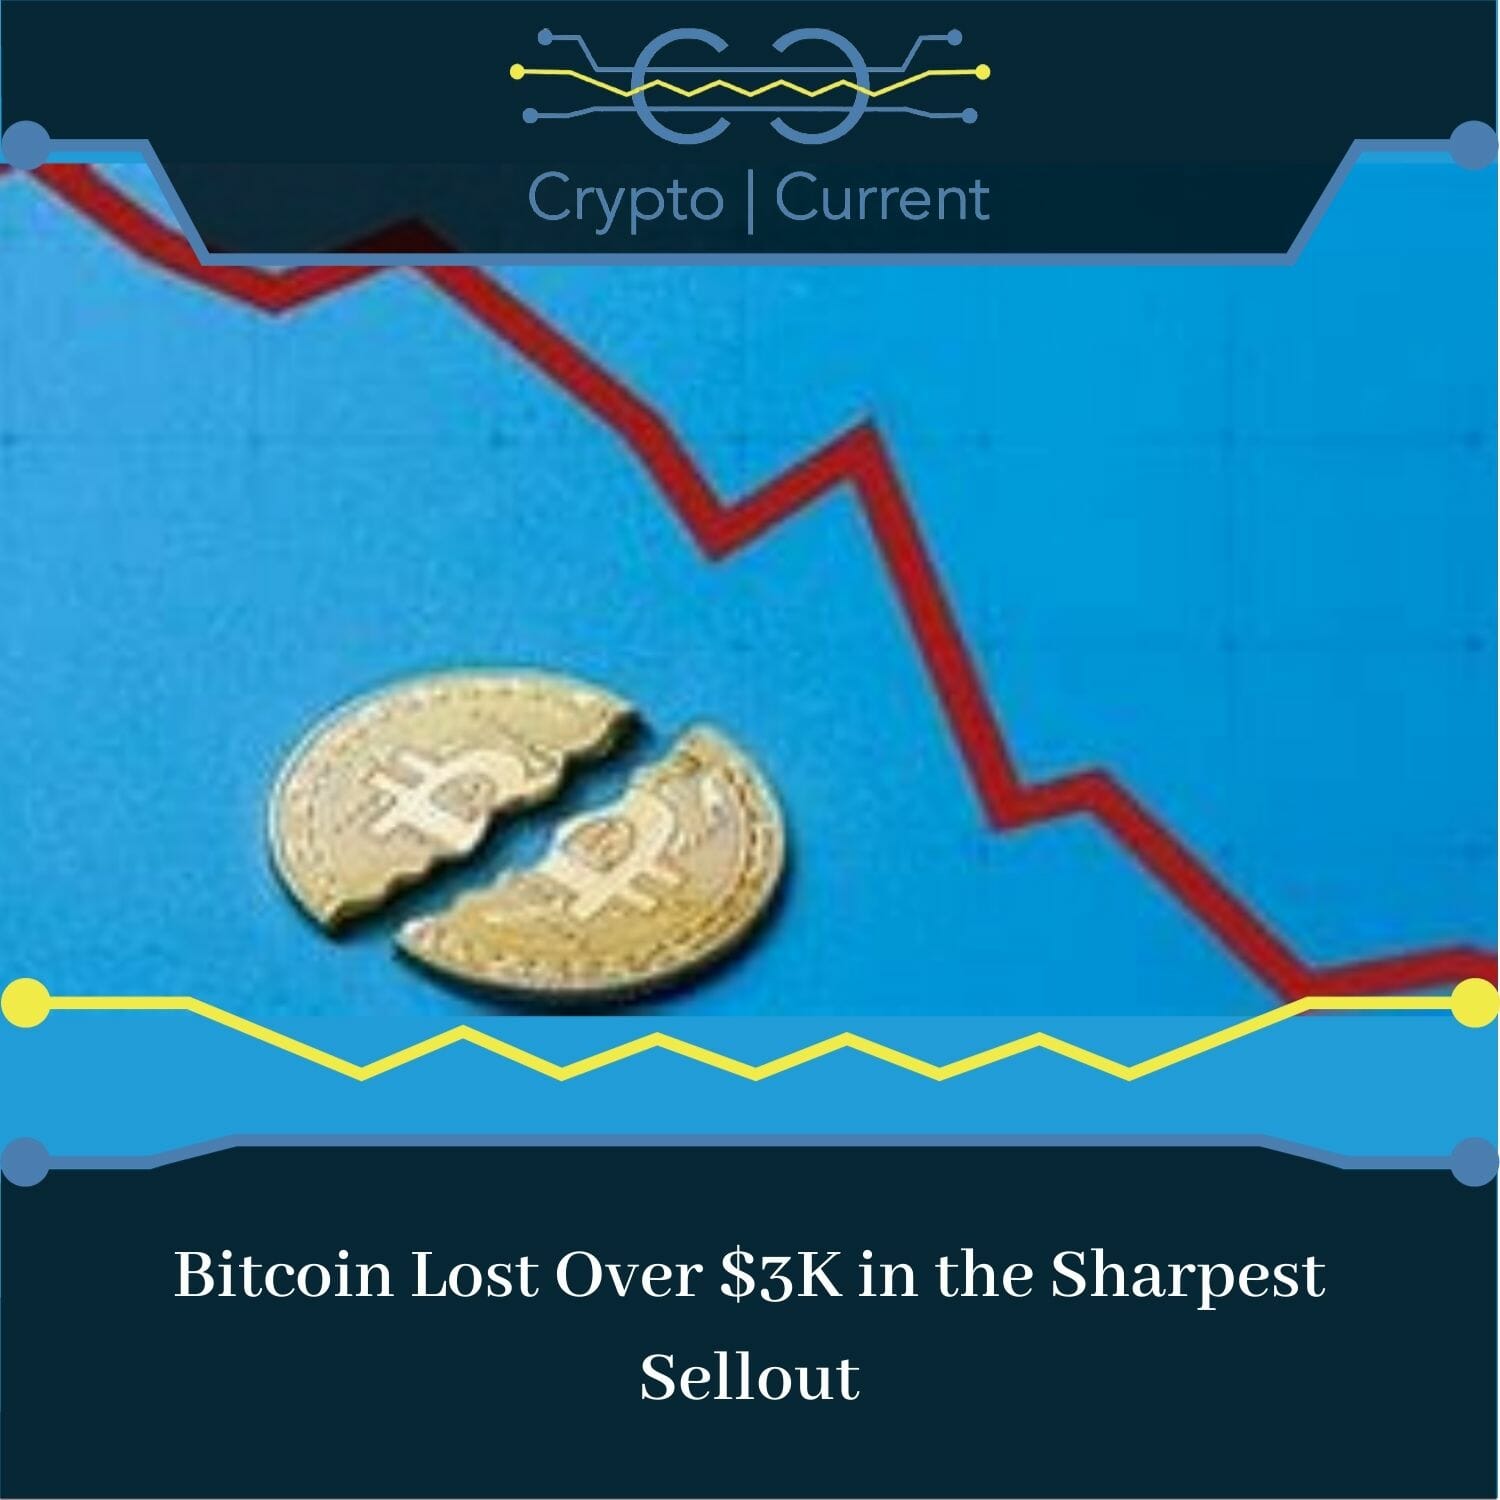 Bitcoin lost almost $3K in the sharpest sell-out - Crypto ...